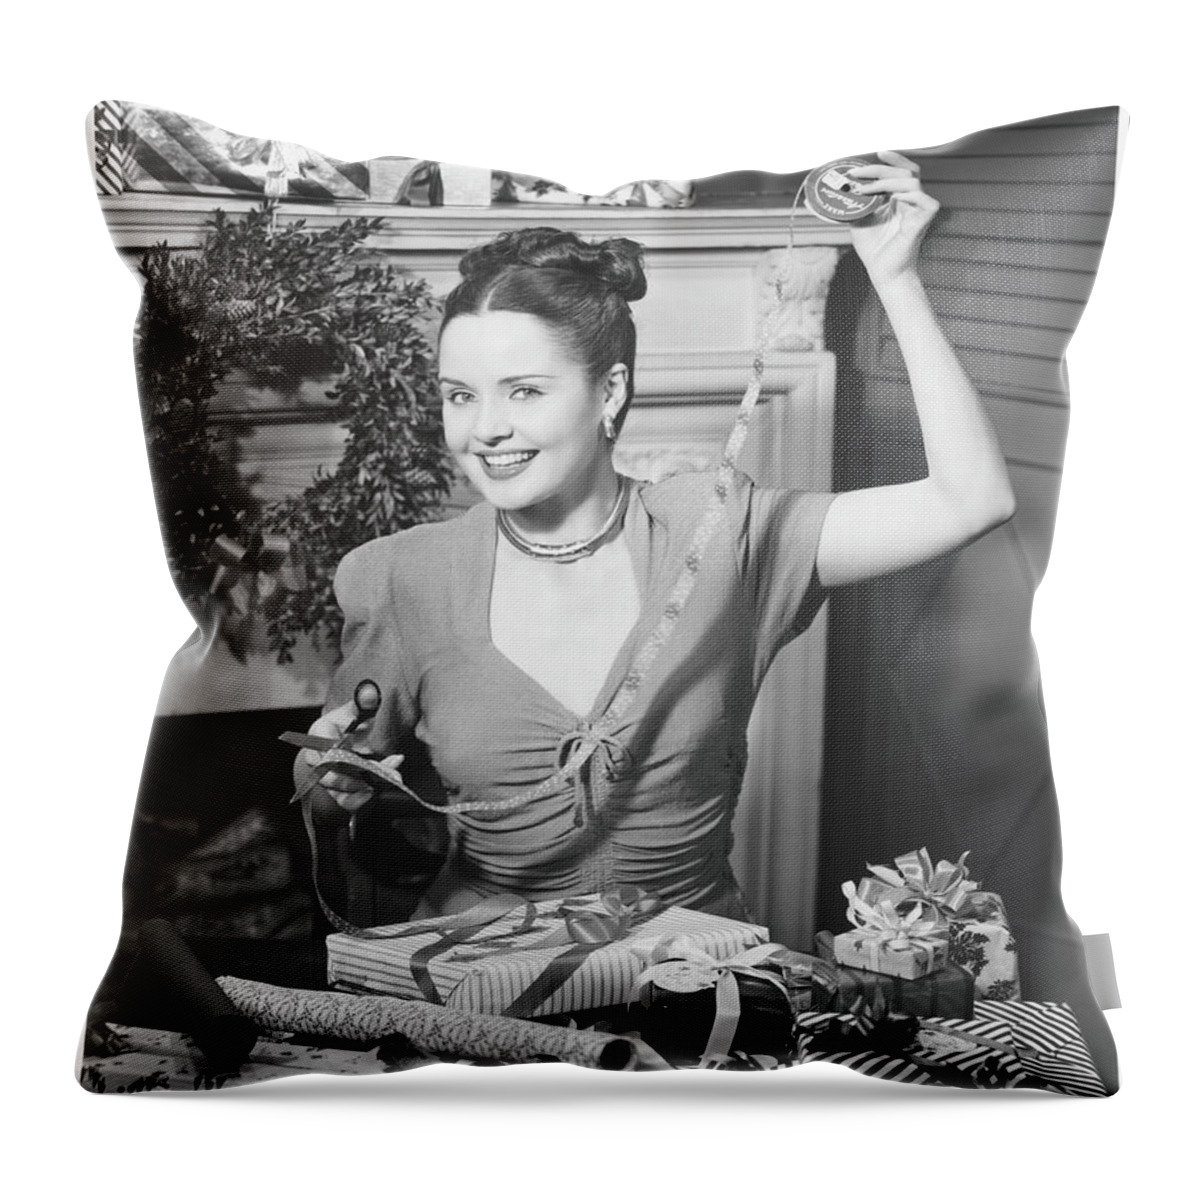 Human Arm Throw Pillow featuring the photograph Woman Wrapping Christmas Presents In by George Marks